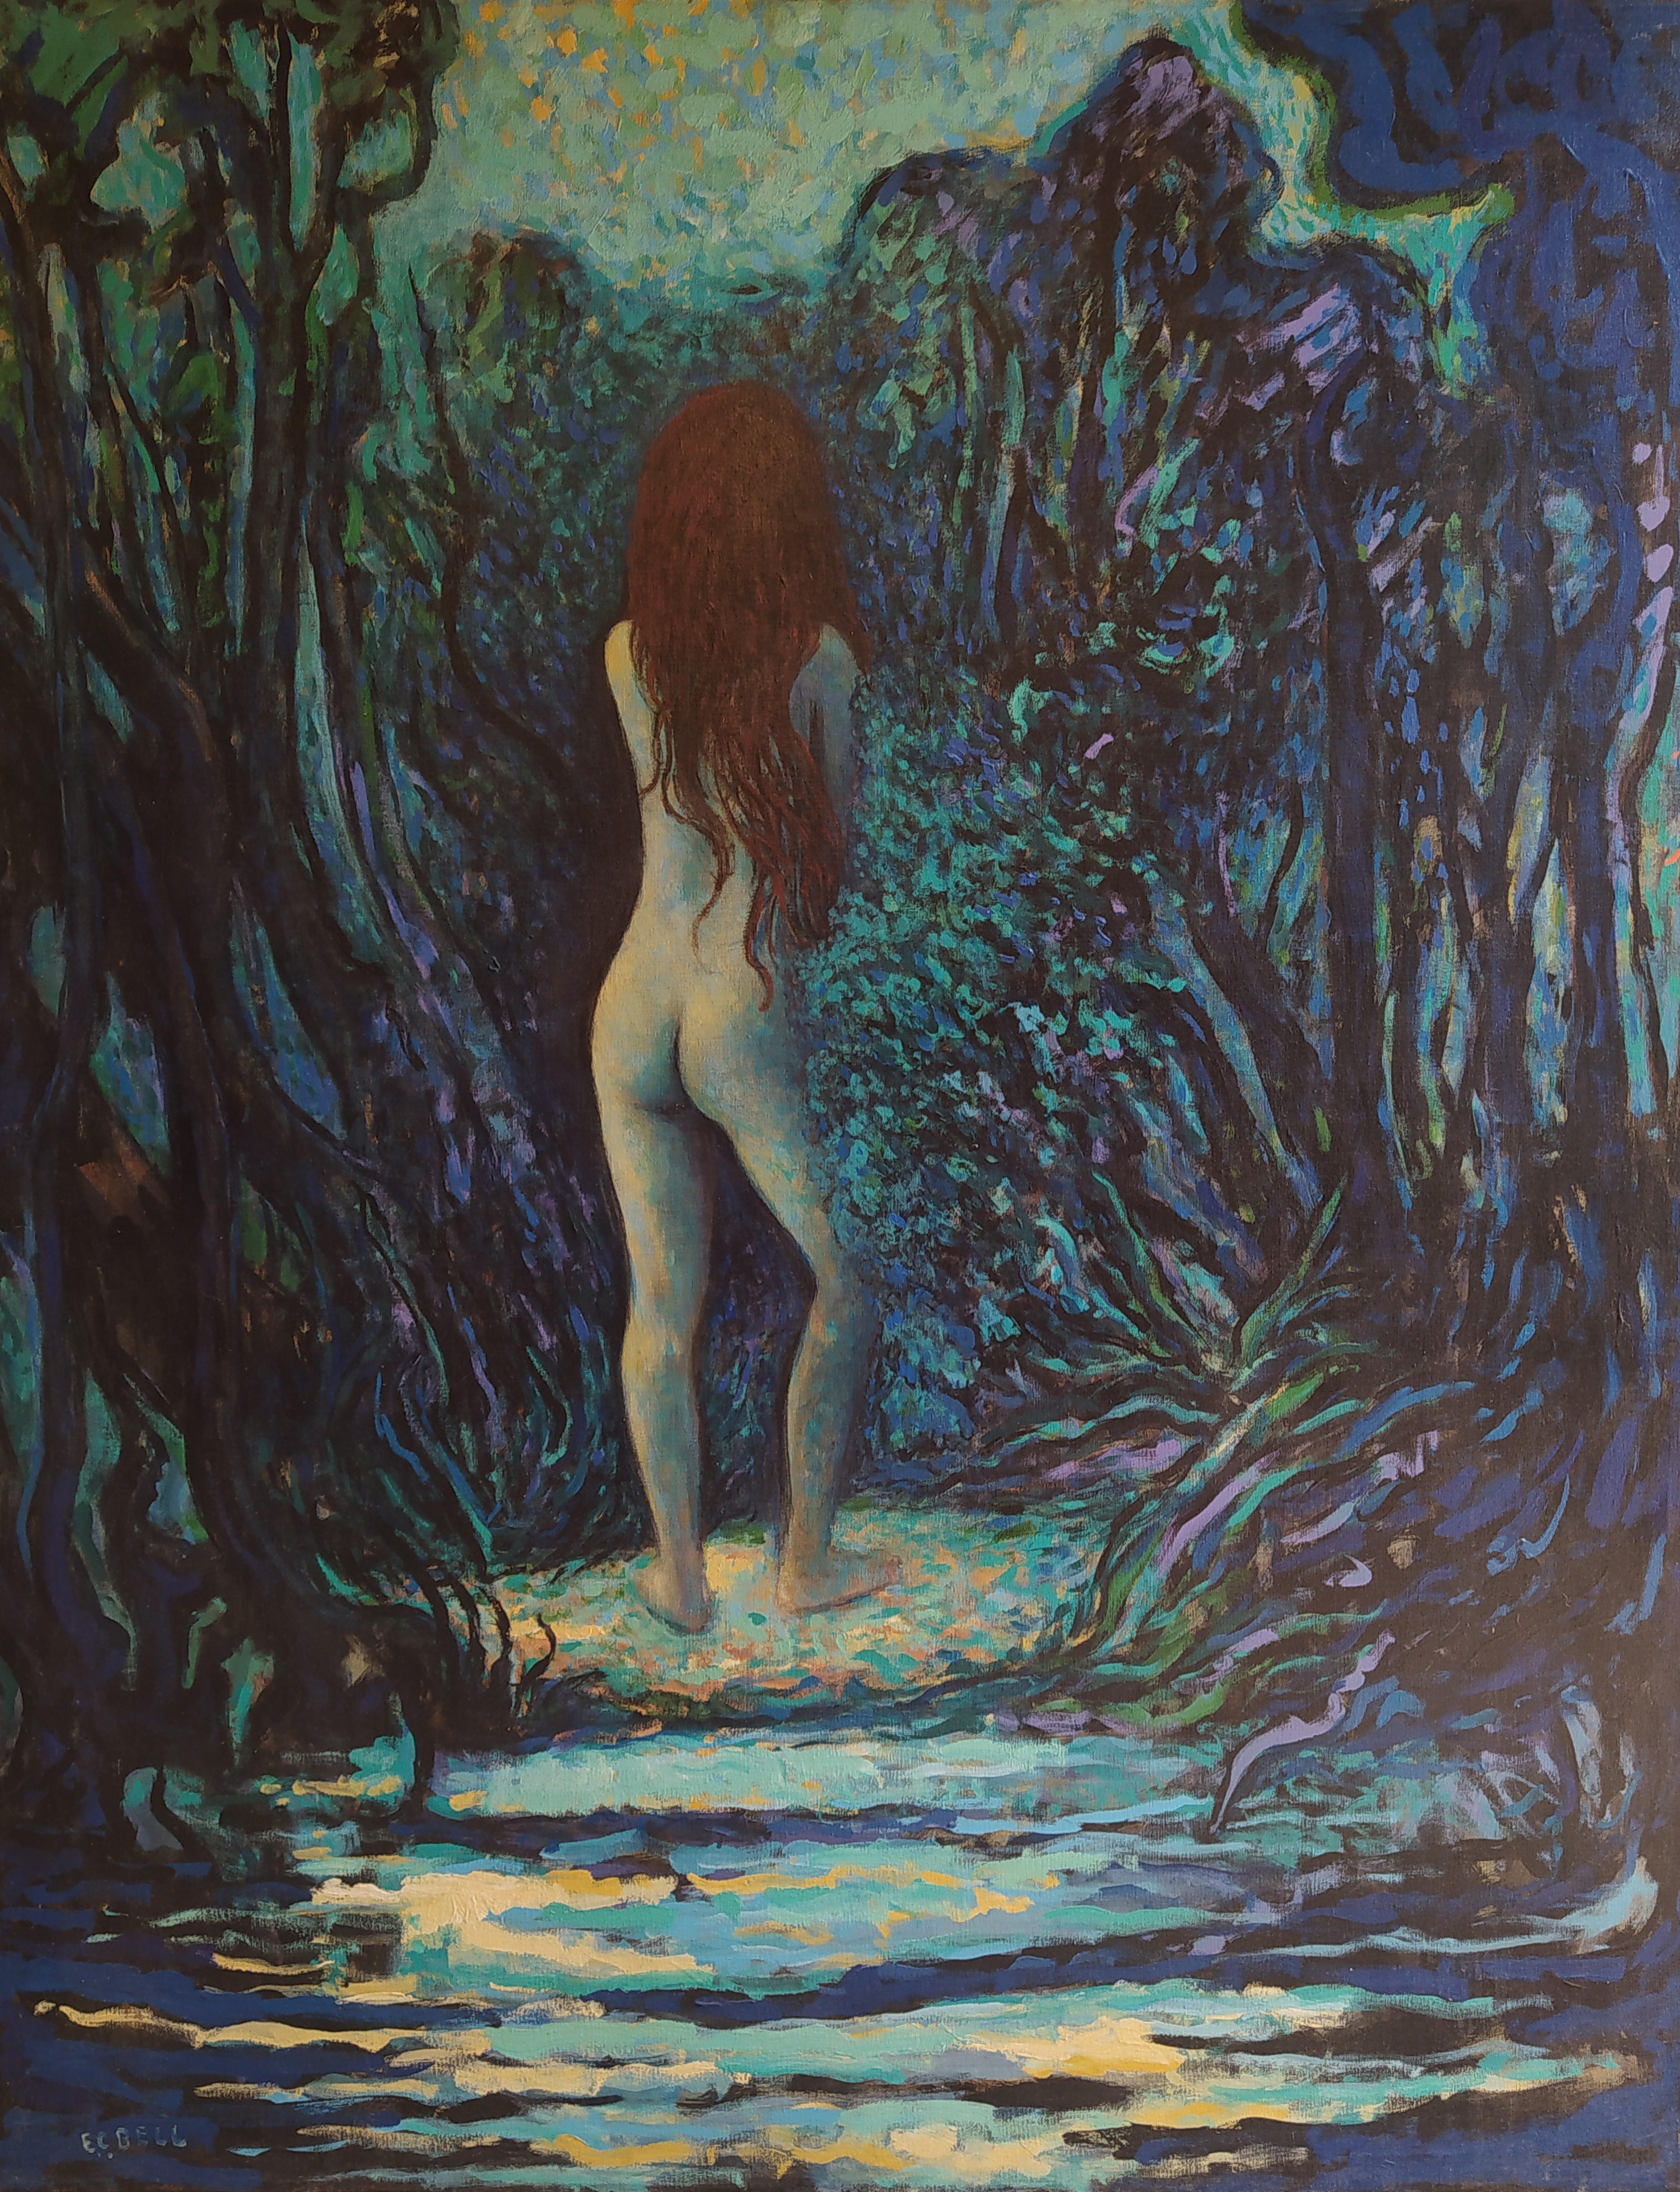 E.C. Bell Nude Painting - "Clearing" - Vertical expressionist landscape with nude, acrylic on canvas.